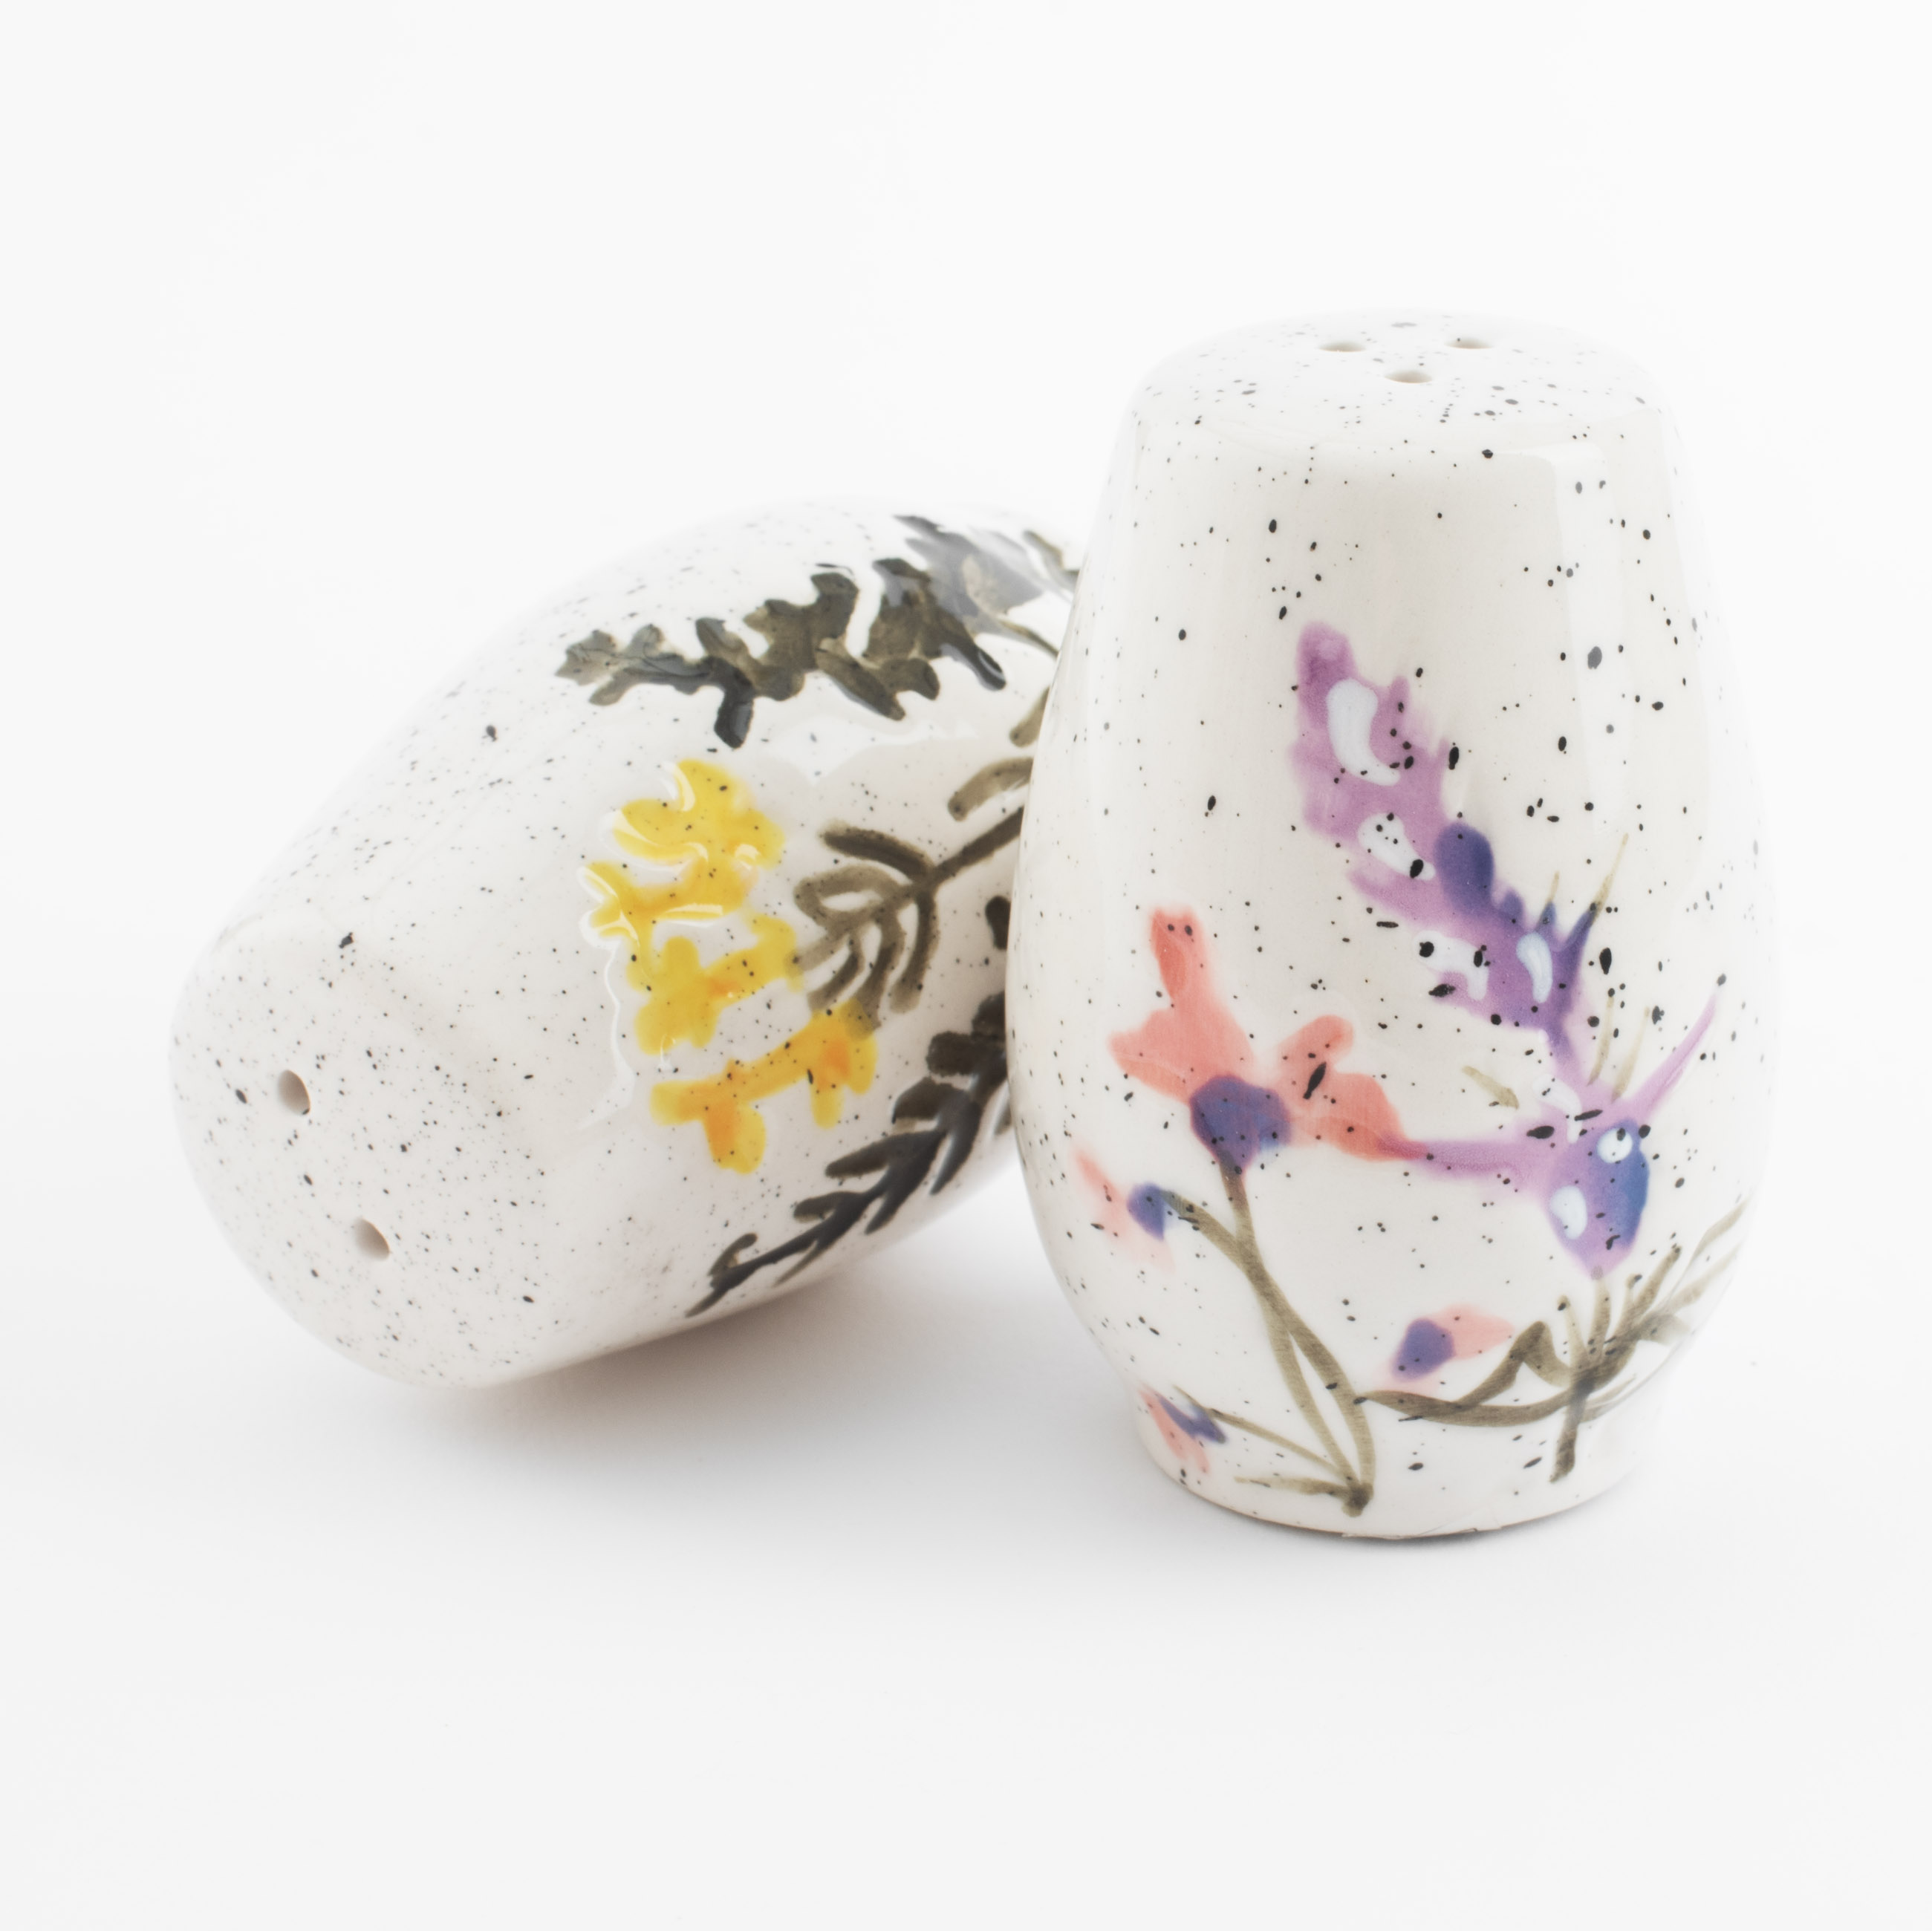 Salt and pepper set, 7 cm, ceramic, milky, speckled, Wildflowers, Meadow speckled изображение № 3